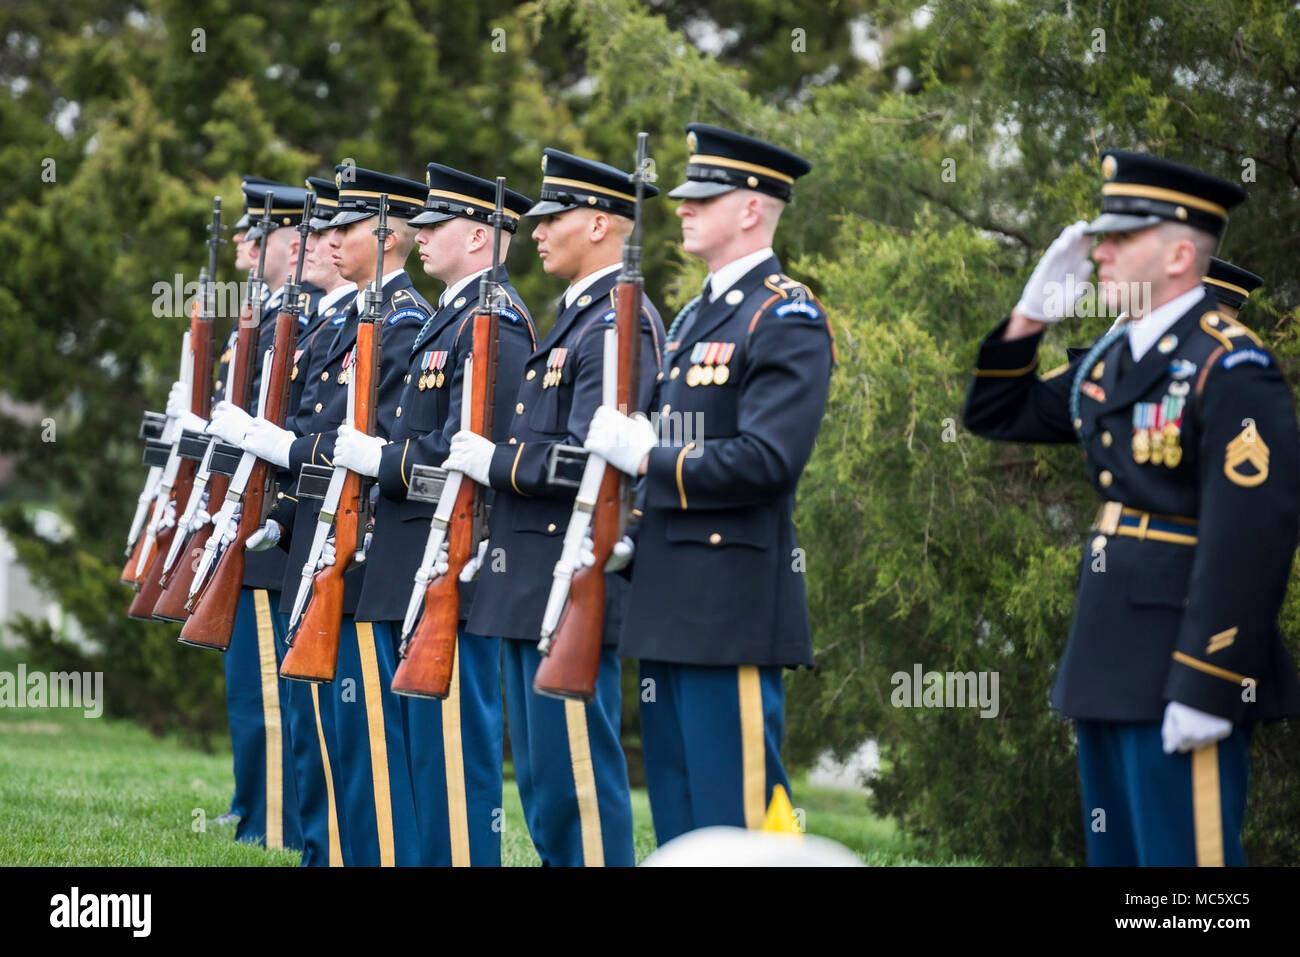 Members of the 3d U.S. Infantry Regiment (The Old Guard) firing party support the full honors funeral of U.S. Army Col. and Estonian Gen. Aleksander Einseln in Section 34 of Arlington National Cemetery, Arlington, Virginia, April 2, 2018.  Born in Estonia, Einseln immigrated to the United States in 1949 and enrolled in the U.S. Army in 1950 at the outbreak of the Korean War. He served with Special Forces in the Vietnam War and retiring as a Colonel in 1985. In 1993, Einseln returned to Estonia at the request of Estonian President Lennart Meri to serve as the first commander of the Estonian Def Stock Photo